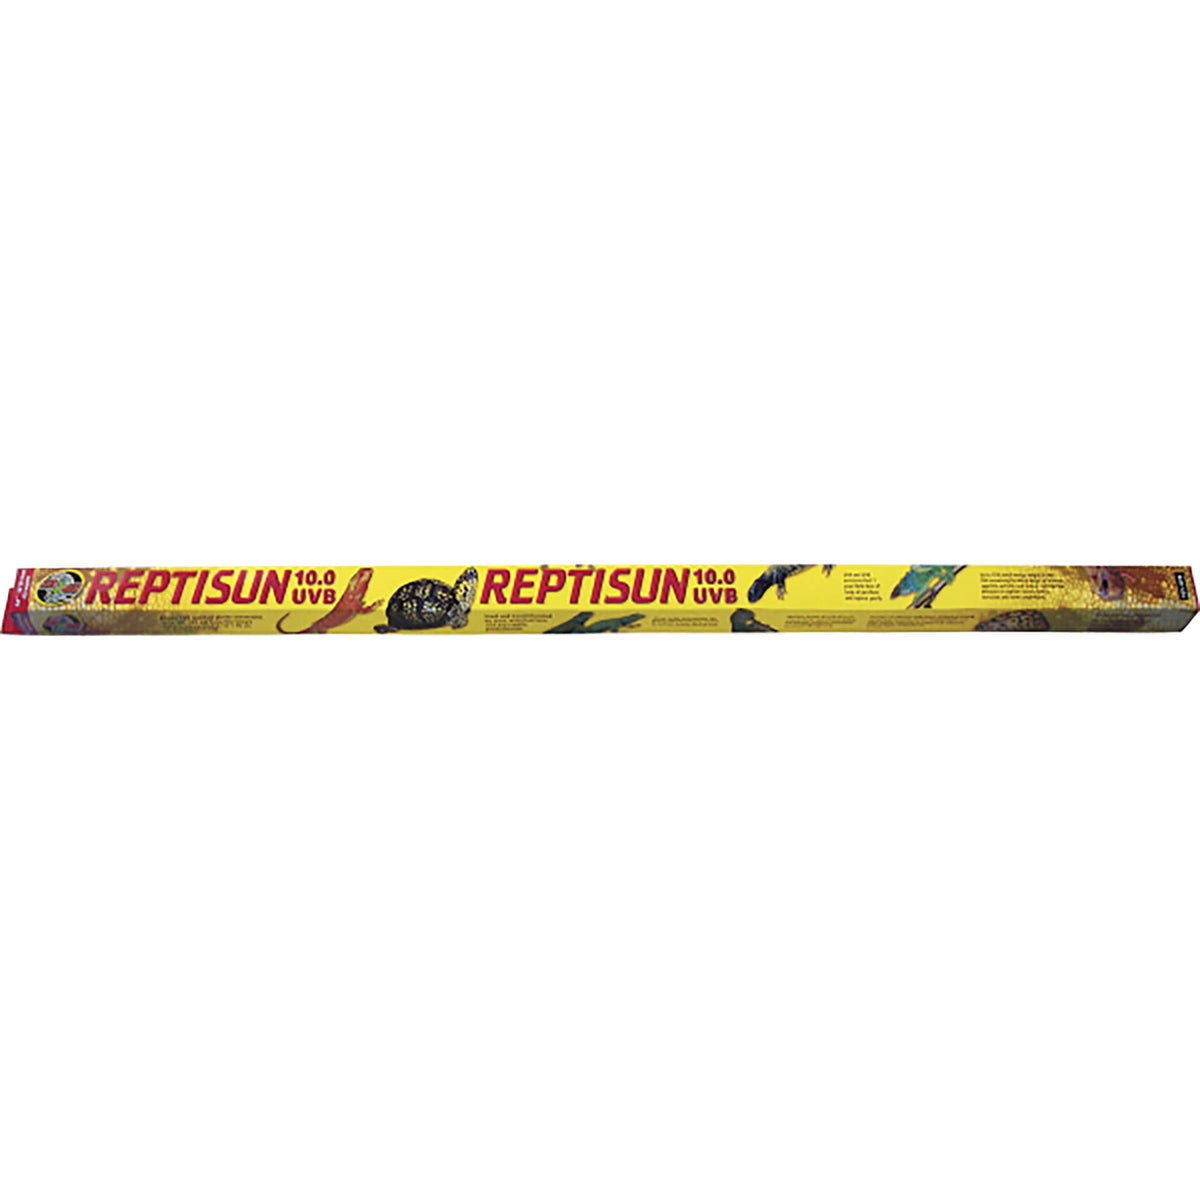 Zoo Med ReptiSun T8 HO 10.0 UVB Tube 121cm 32w - In Store Only Pick Up